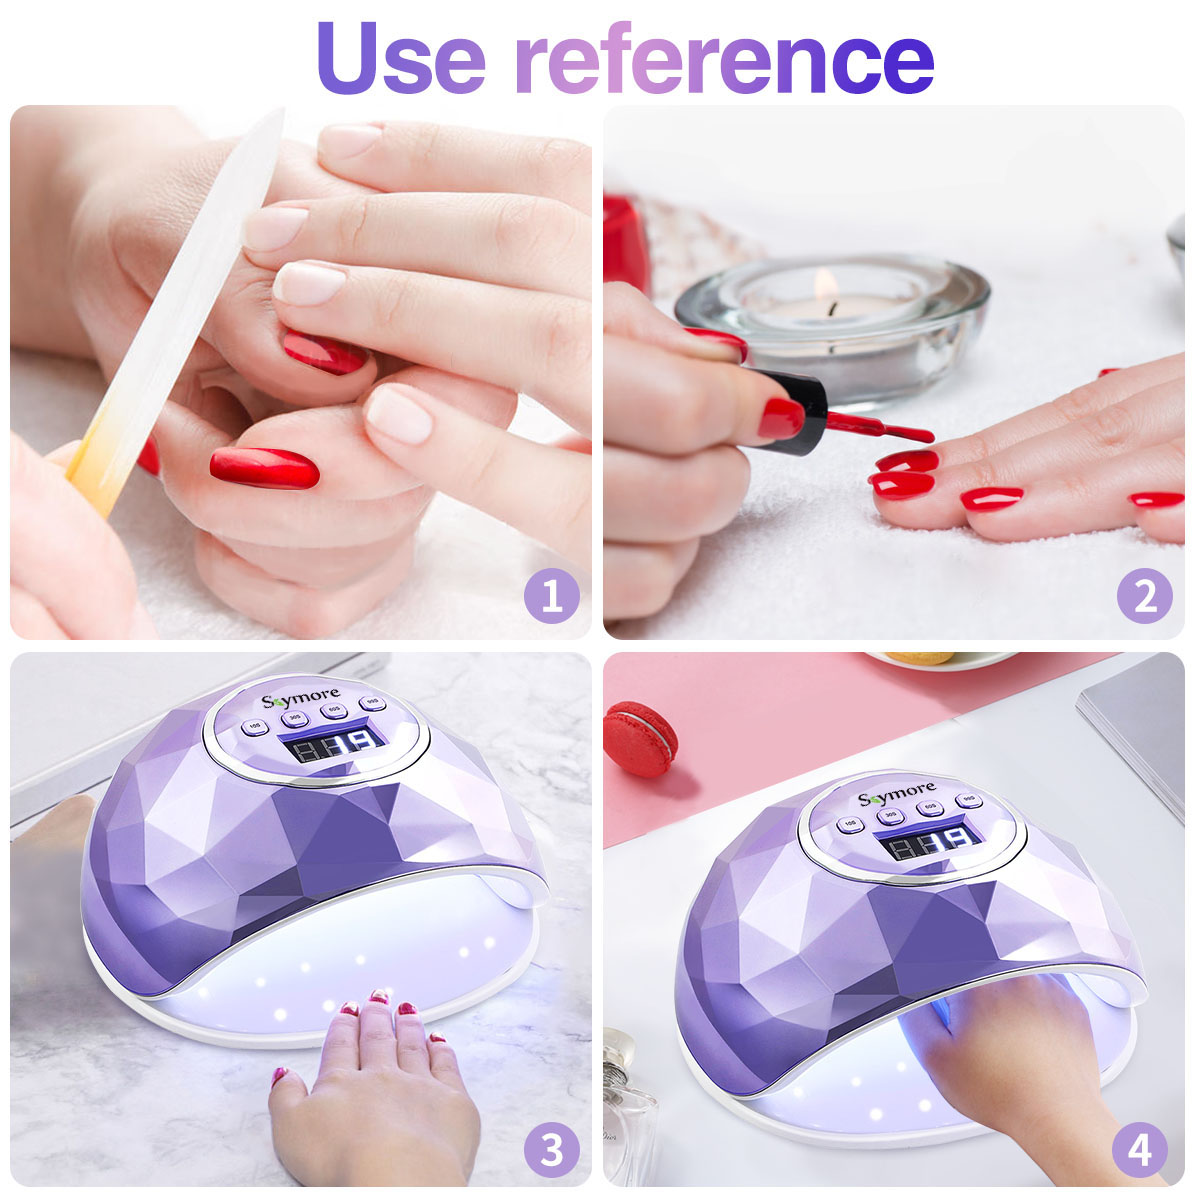 86W-UV-LED-Nail-Lamp-Automatic-Curing-Nail-Dryer-LCD-Display-Manicure-Pedicure-Tools-1844147-5